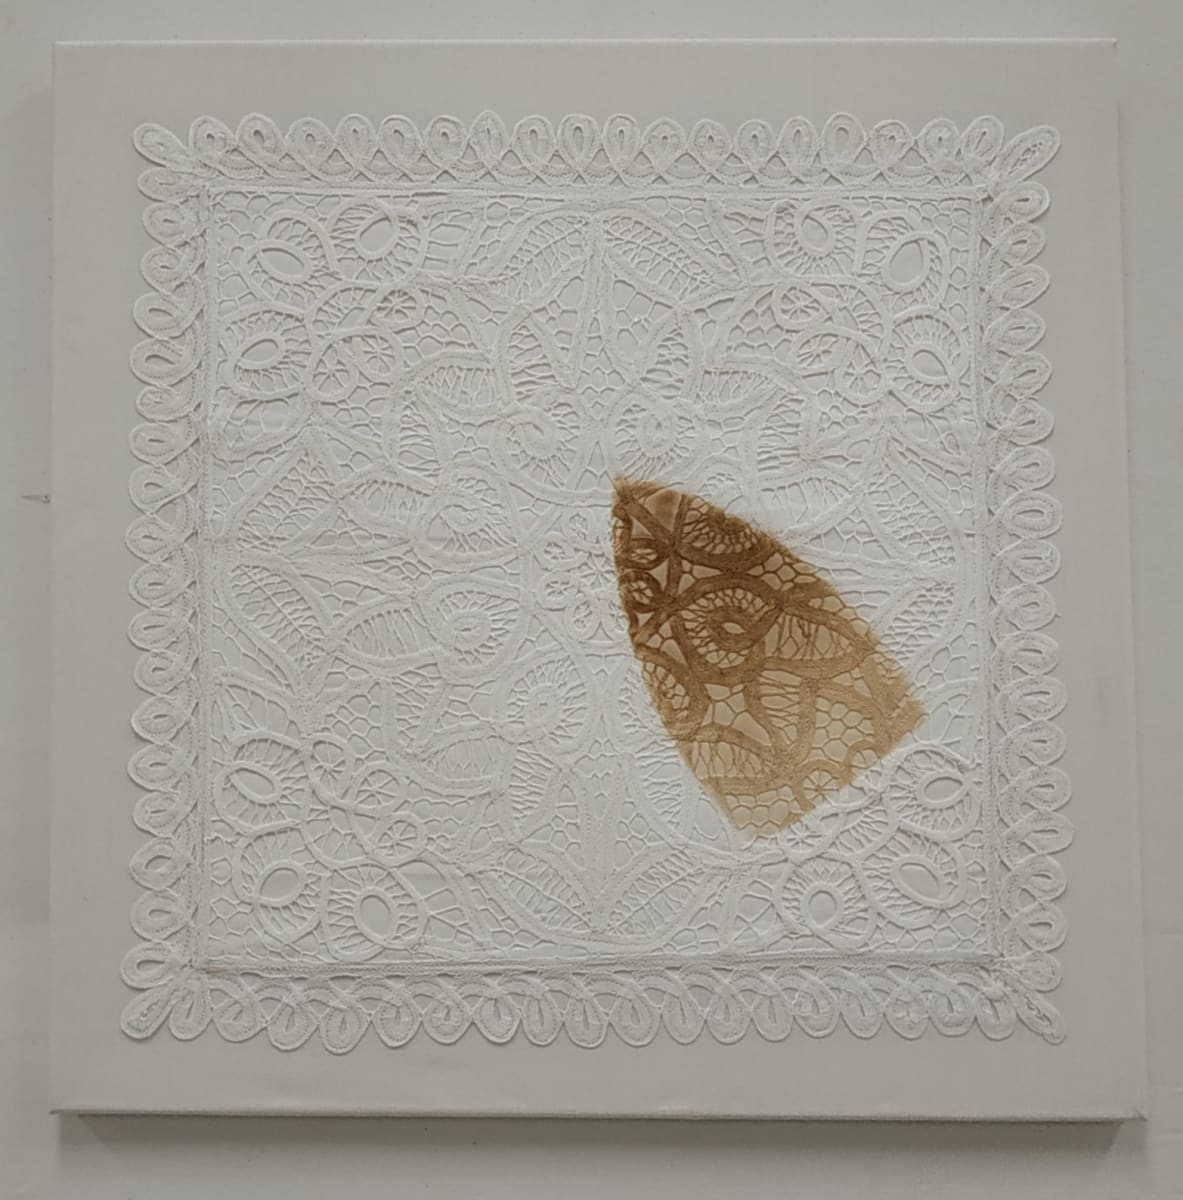 Scorch: Oops by Lesley Turner  Image: Lesley Turner, 'Scorch: Oops', 2020, 22"x22". Lace pillow case, bedsheet, polyester thread. To deliberately ruin this pillow case is a subversive act.